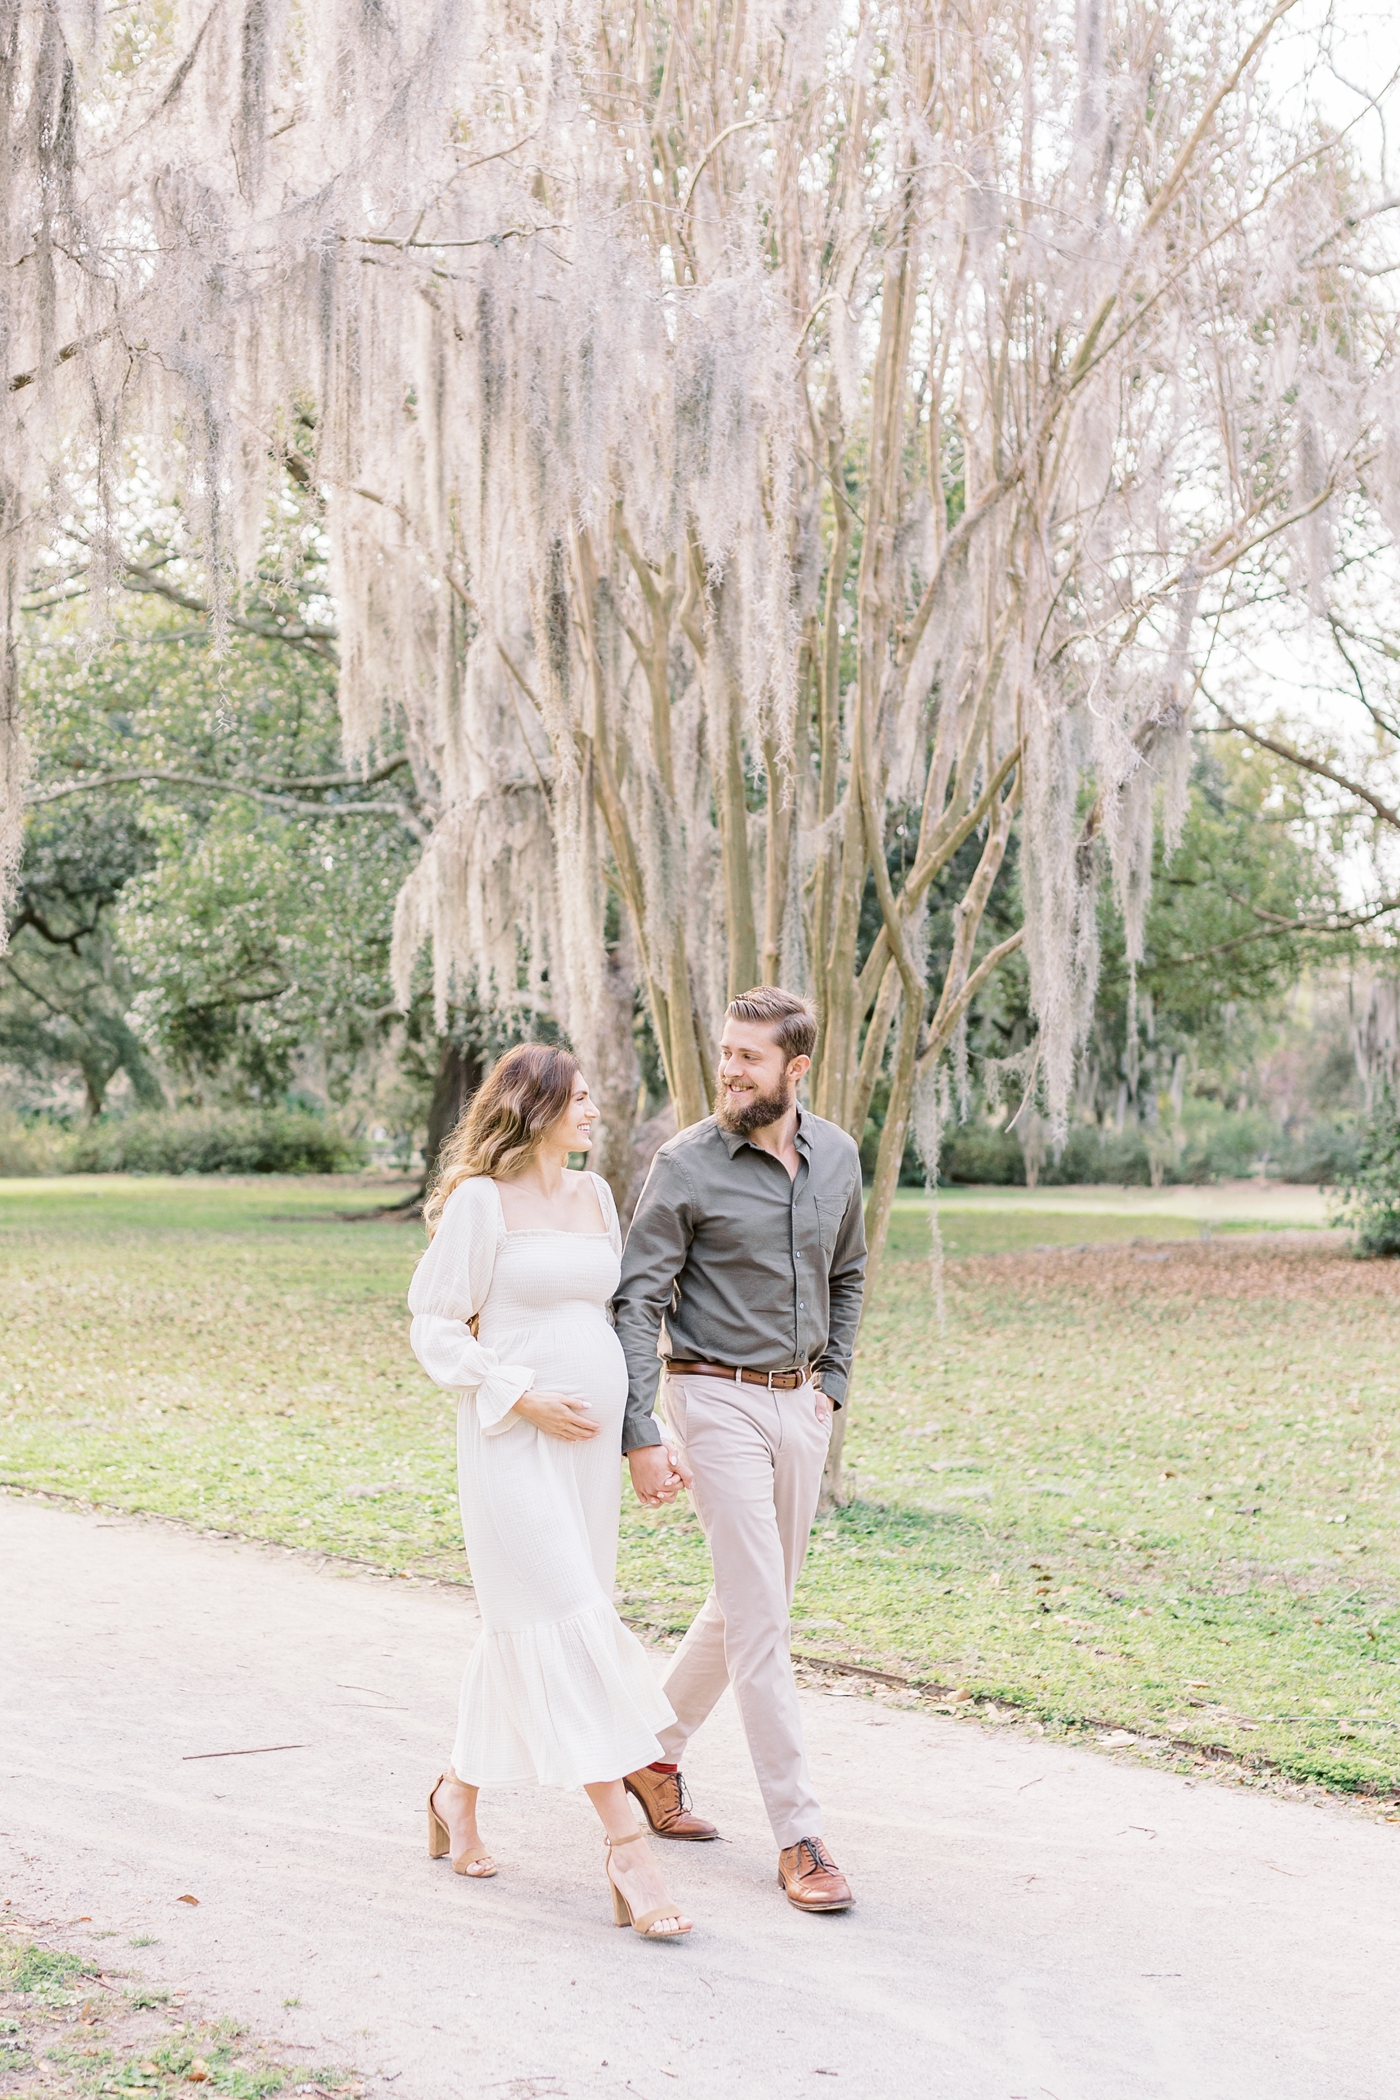 Expecting parents smiling at each other while walking on path in park during session with Charleston photographer, Caitlyn Motycka Photography.